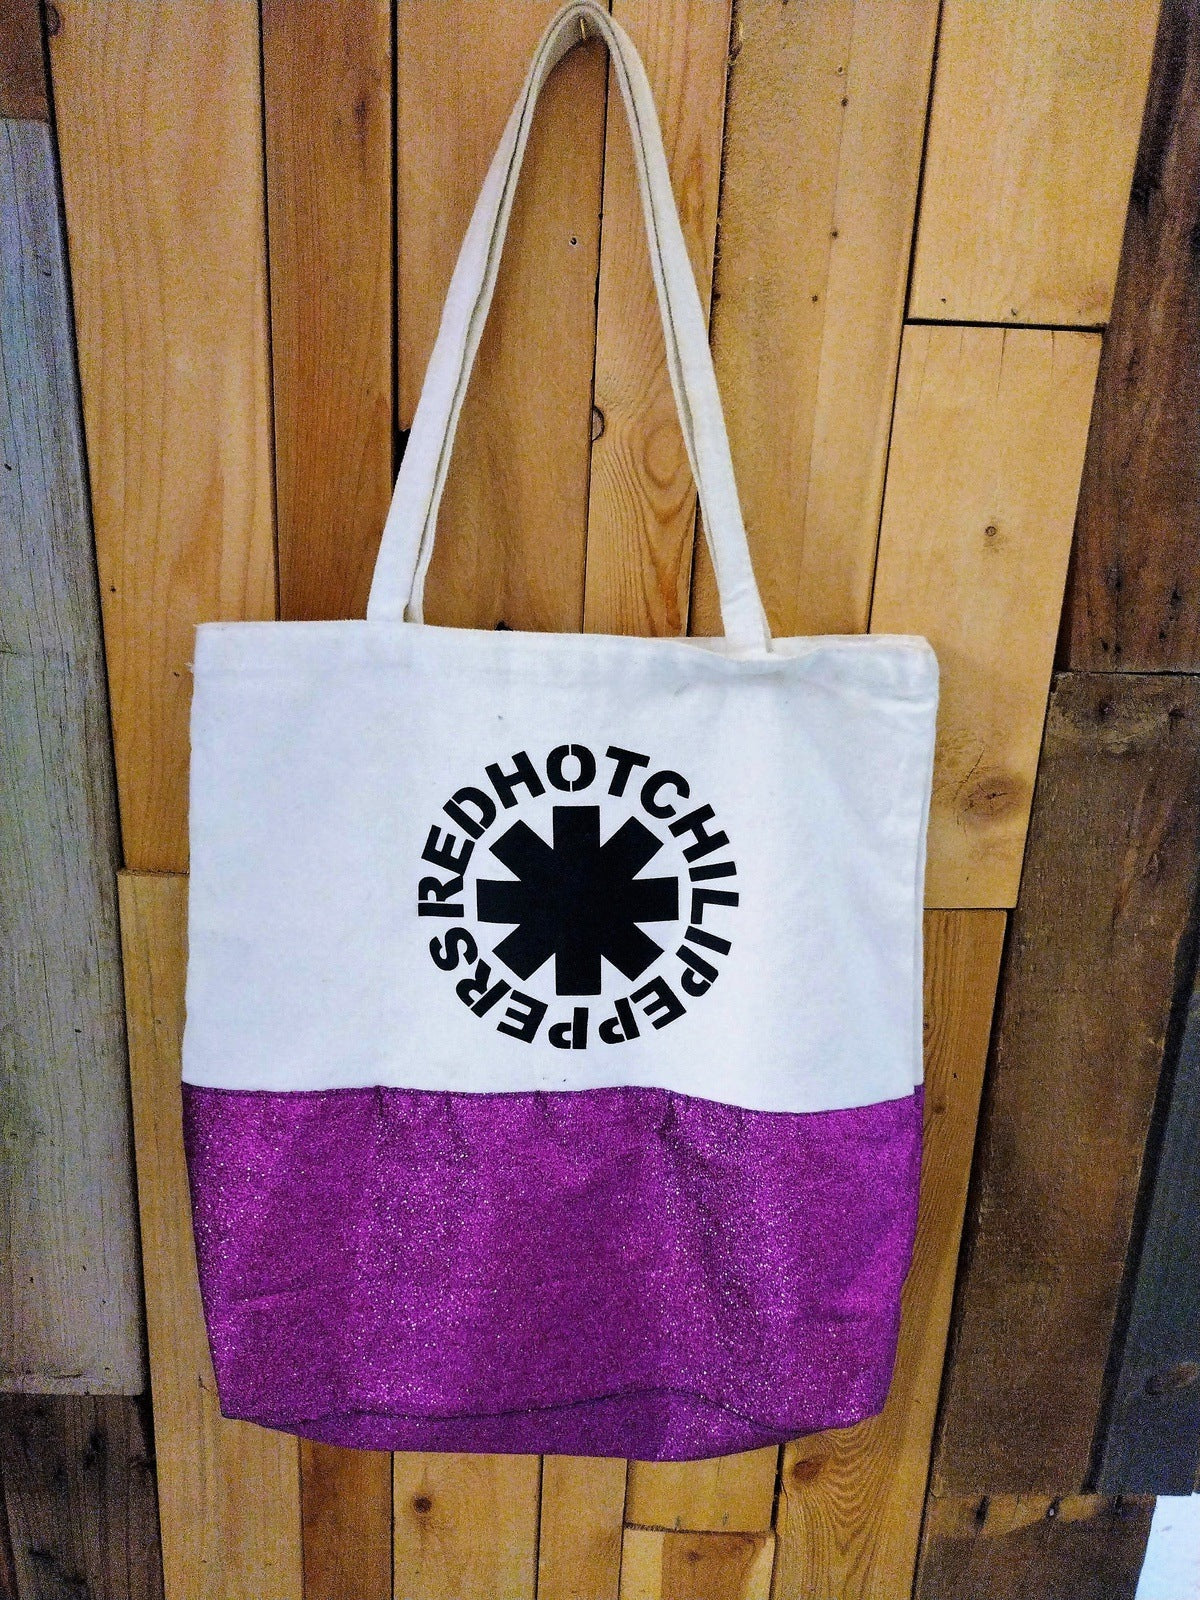 Red Hot Chili Peppers Canvas Tote with Purple Sparkle